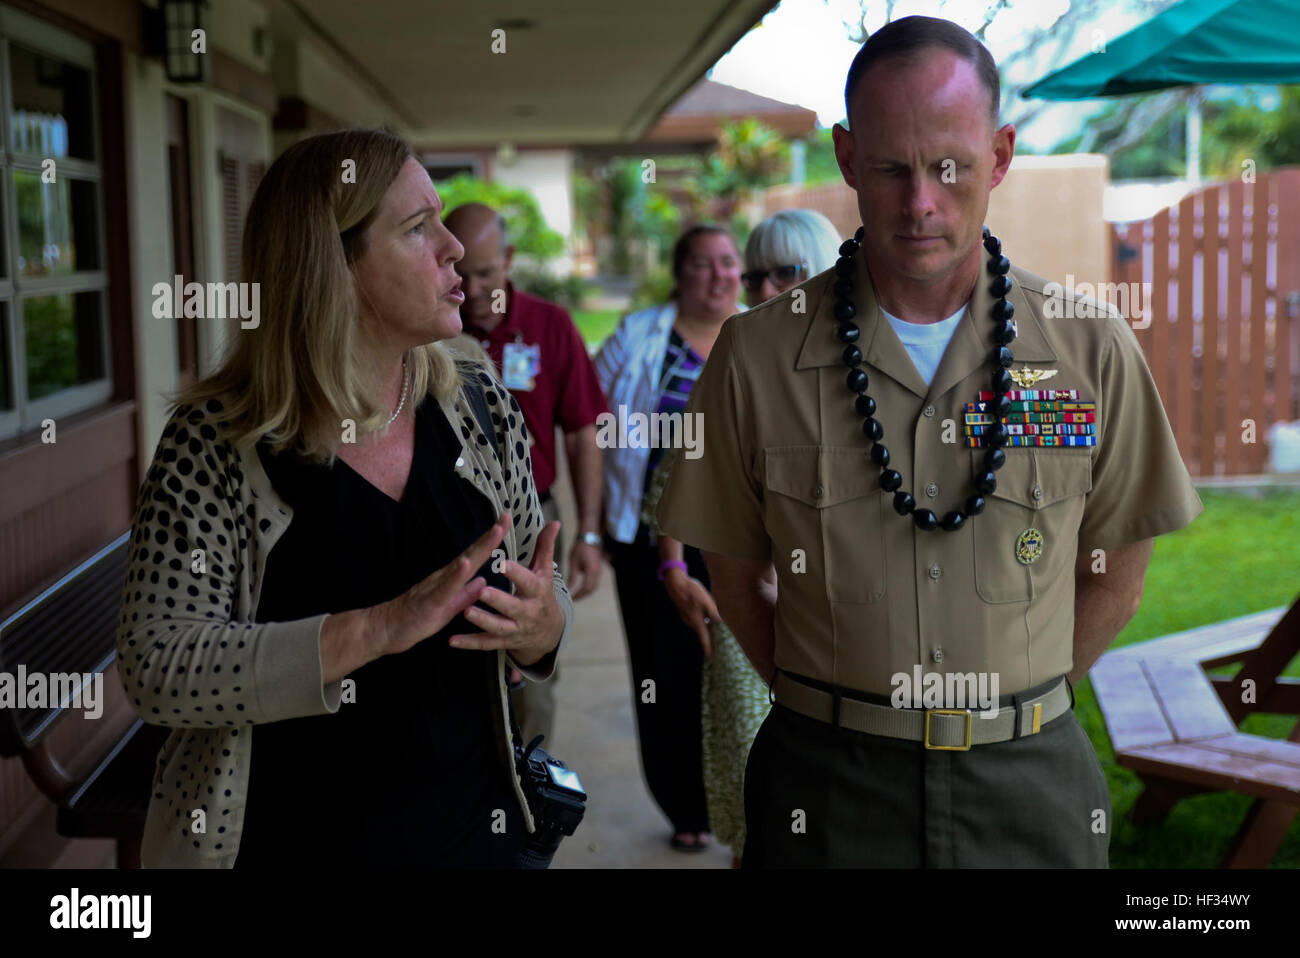 Julie Dugan, the business community outreach manager with the Hawaii Job Corps Center, provides a tour to Col. Eric W. Schaefer, the commanding officer for Marine Corps Base Hawaii, along with other Job Corps staff and base representatives March 24, 2015, at the Job Corps Center in Waimanalo. Since 1964, the Job Corps has been committed to offering students a safe, drug-free learning and training environment. (U.S. Marine Corps photo by Lance Cpl. Harley Thomas/released) Hawaii Job Corps pushes students toward summit 150324-M-SB674-803 Stock Photo